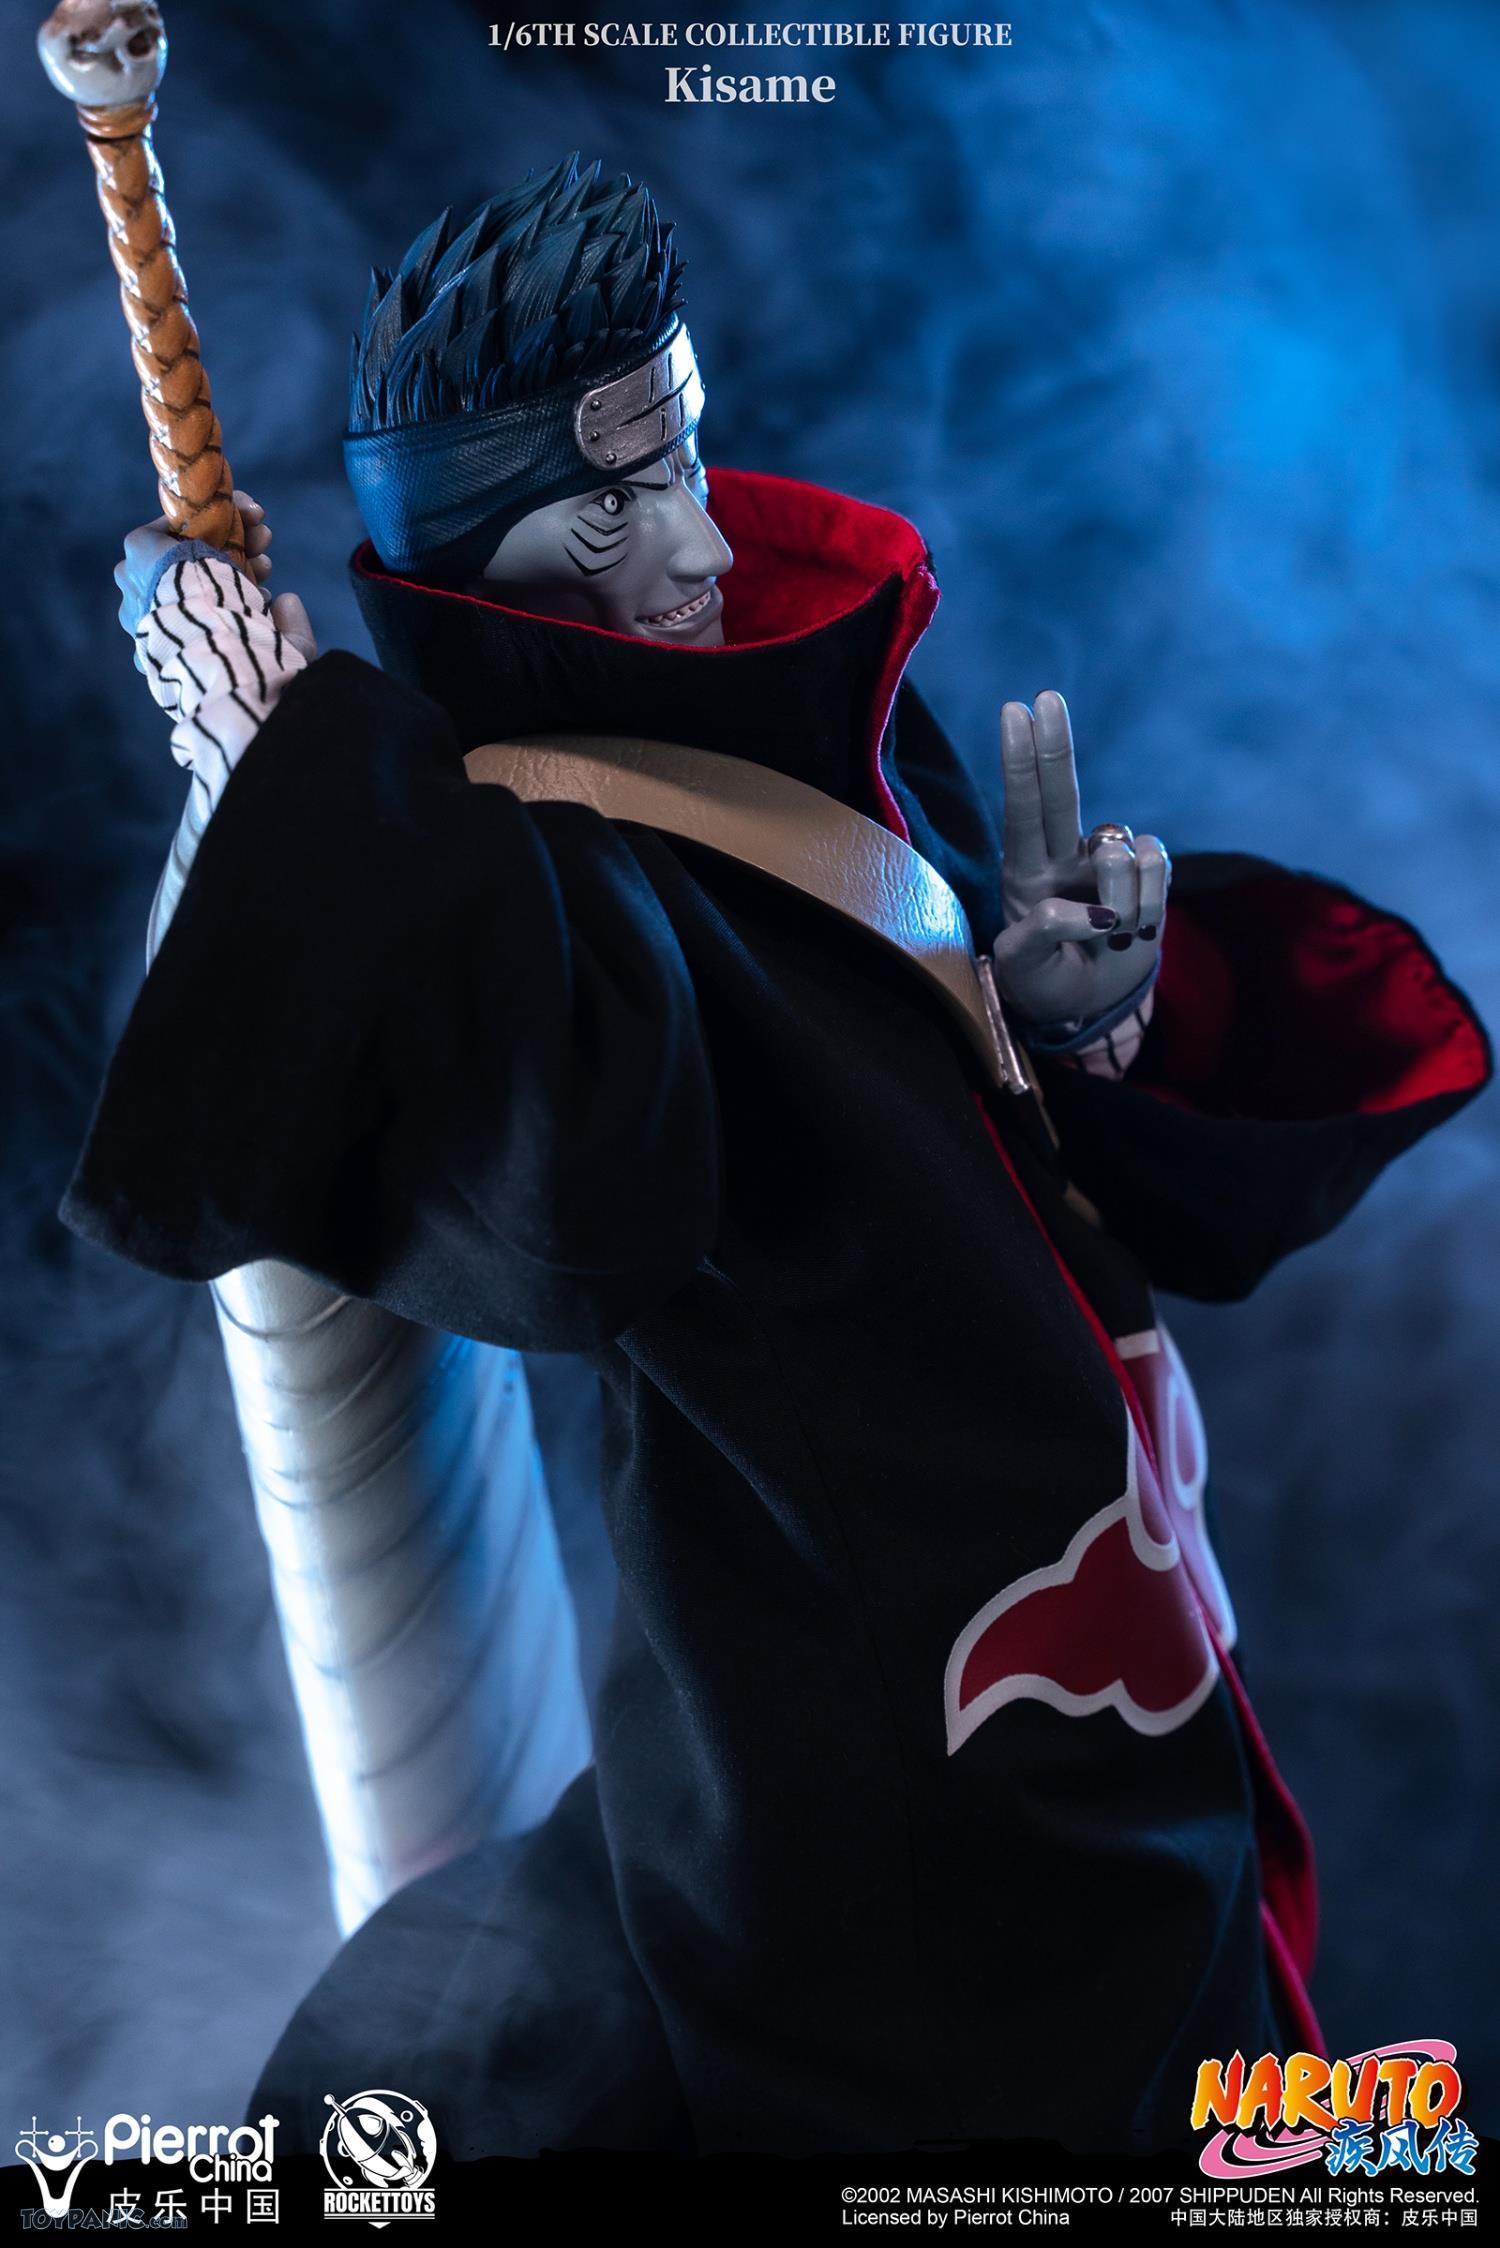 RocketToys - NEW PRODUCT: Rocket Toys ROC-007 1/6 Scale Kisame 221202460436PM_37297